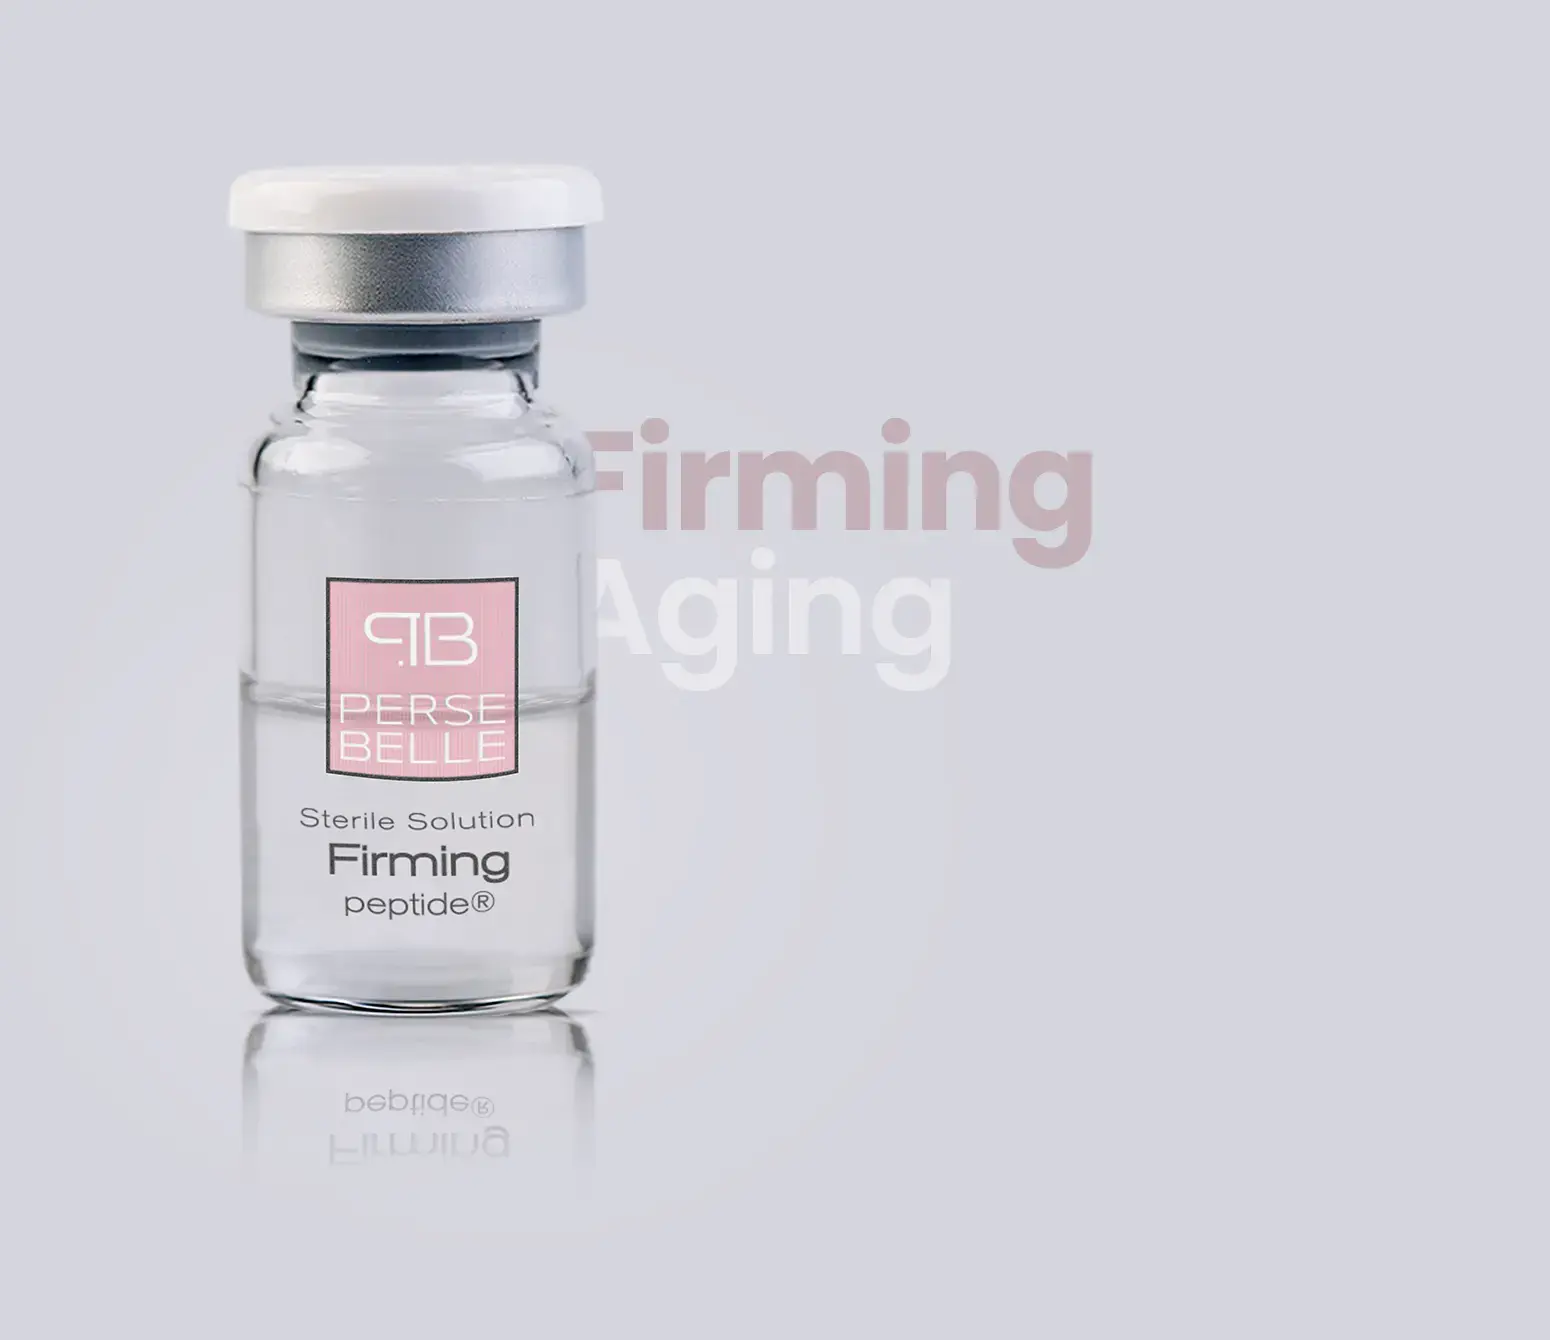 Firming Aging- Persebelle